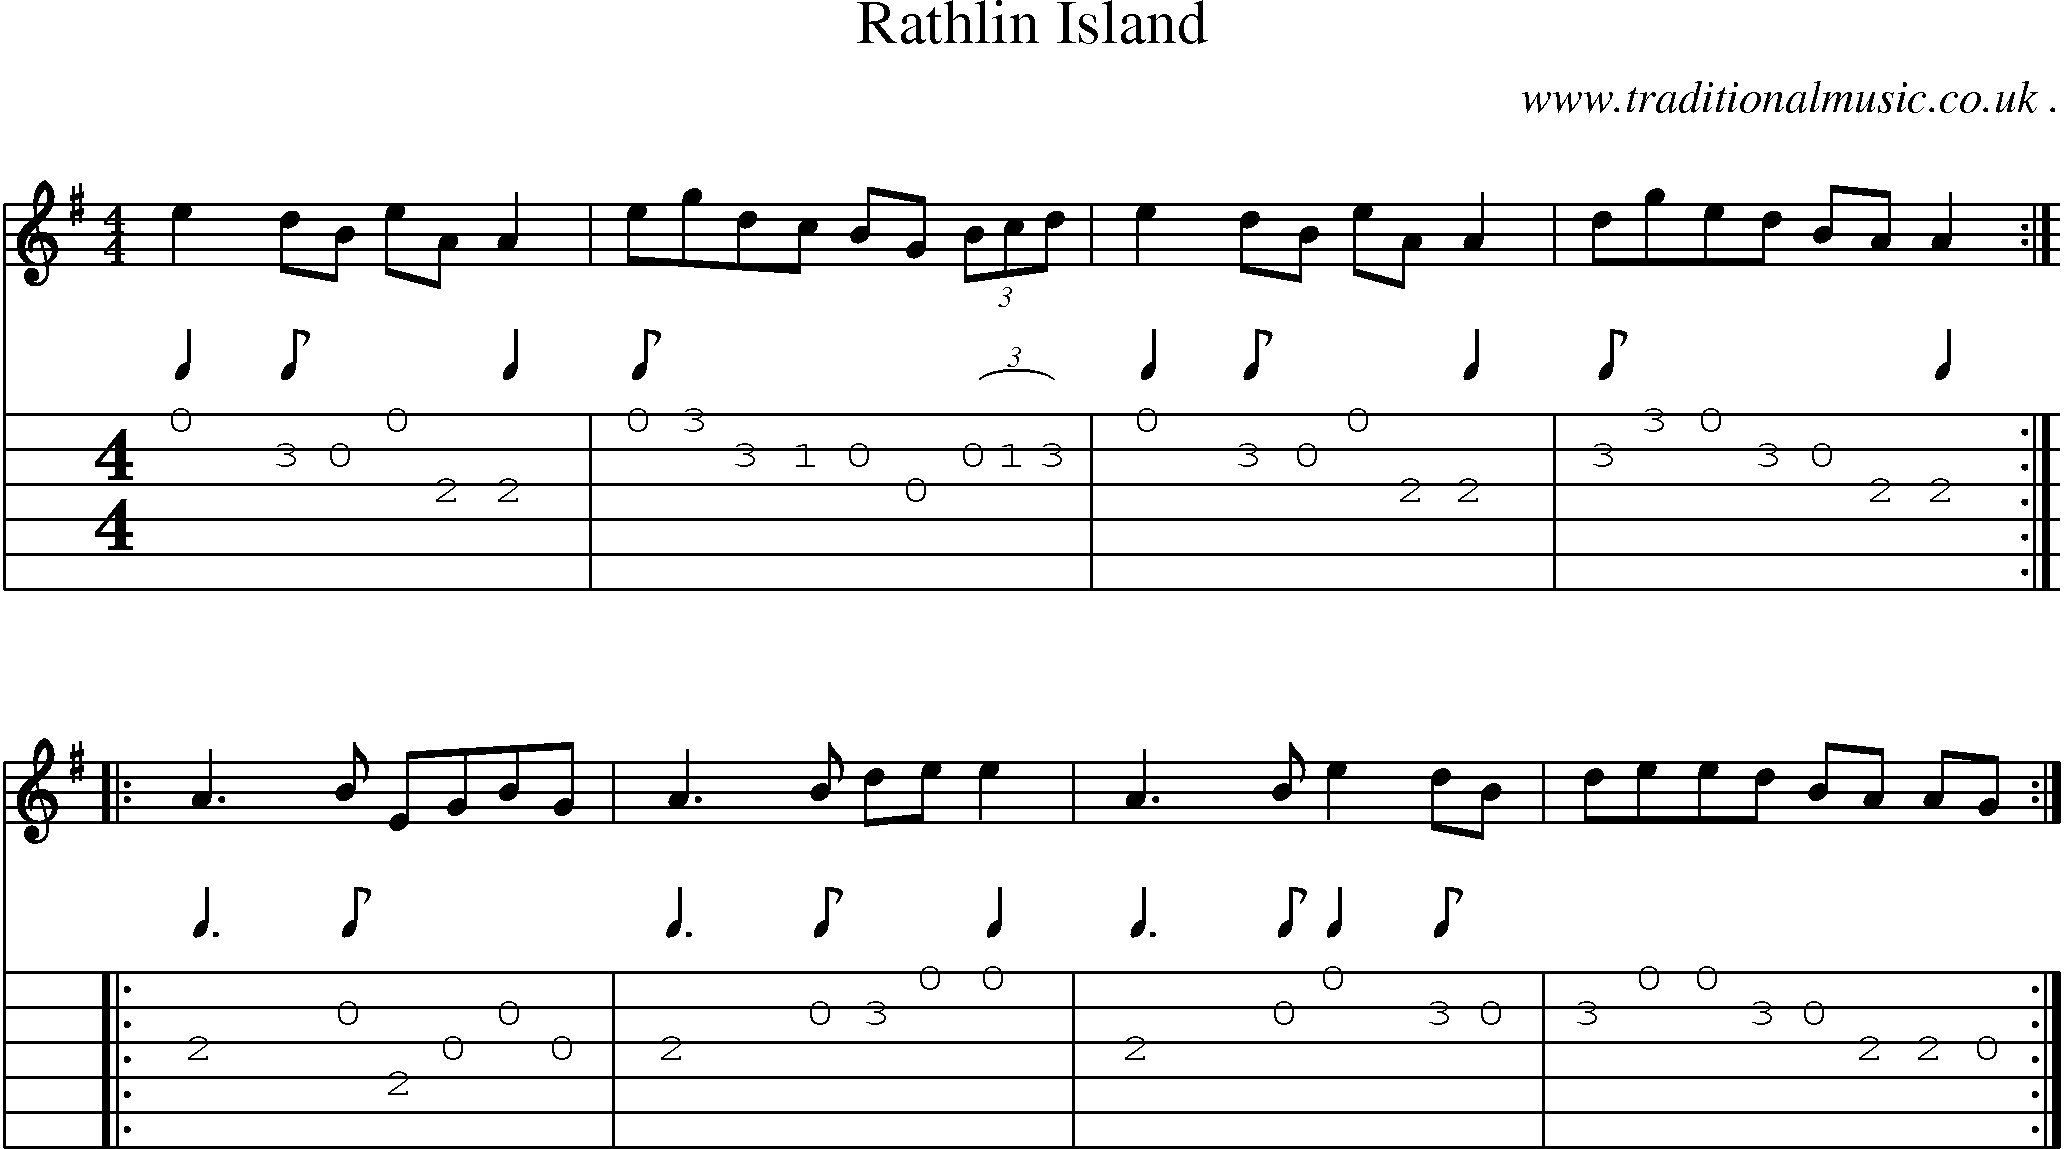 Sheet-Music and Guitar Tabs for Rathlin Island